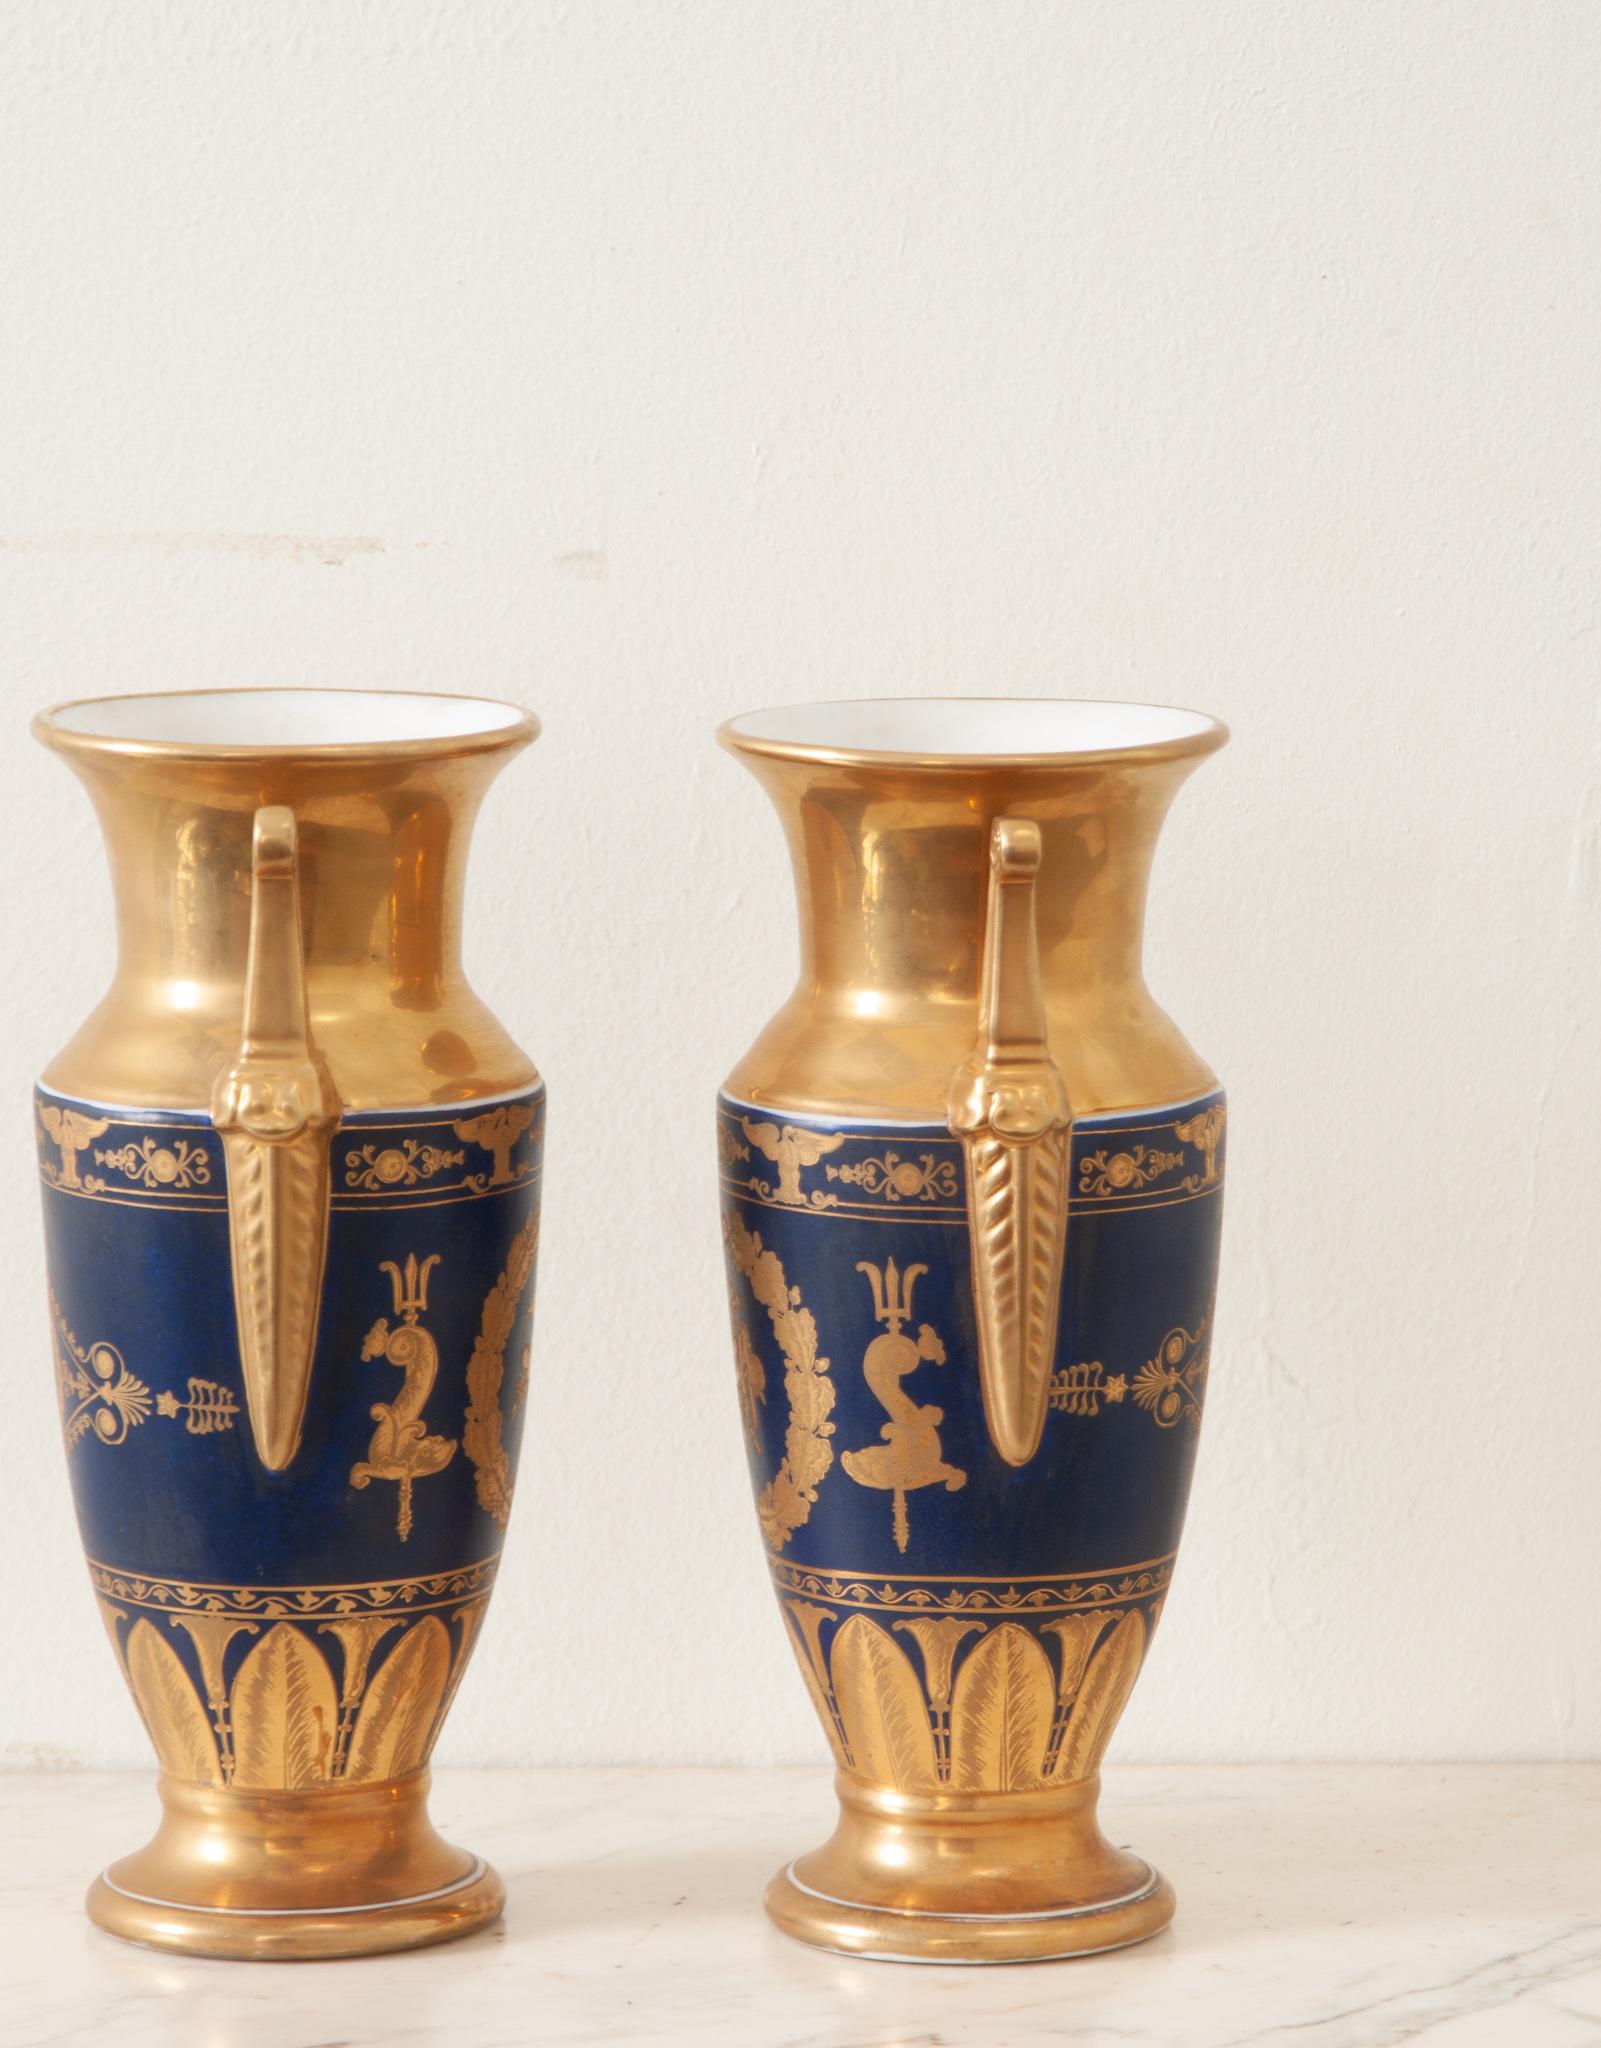 Contemporary Pair of Reproduction Napoleon III Vases